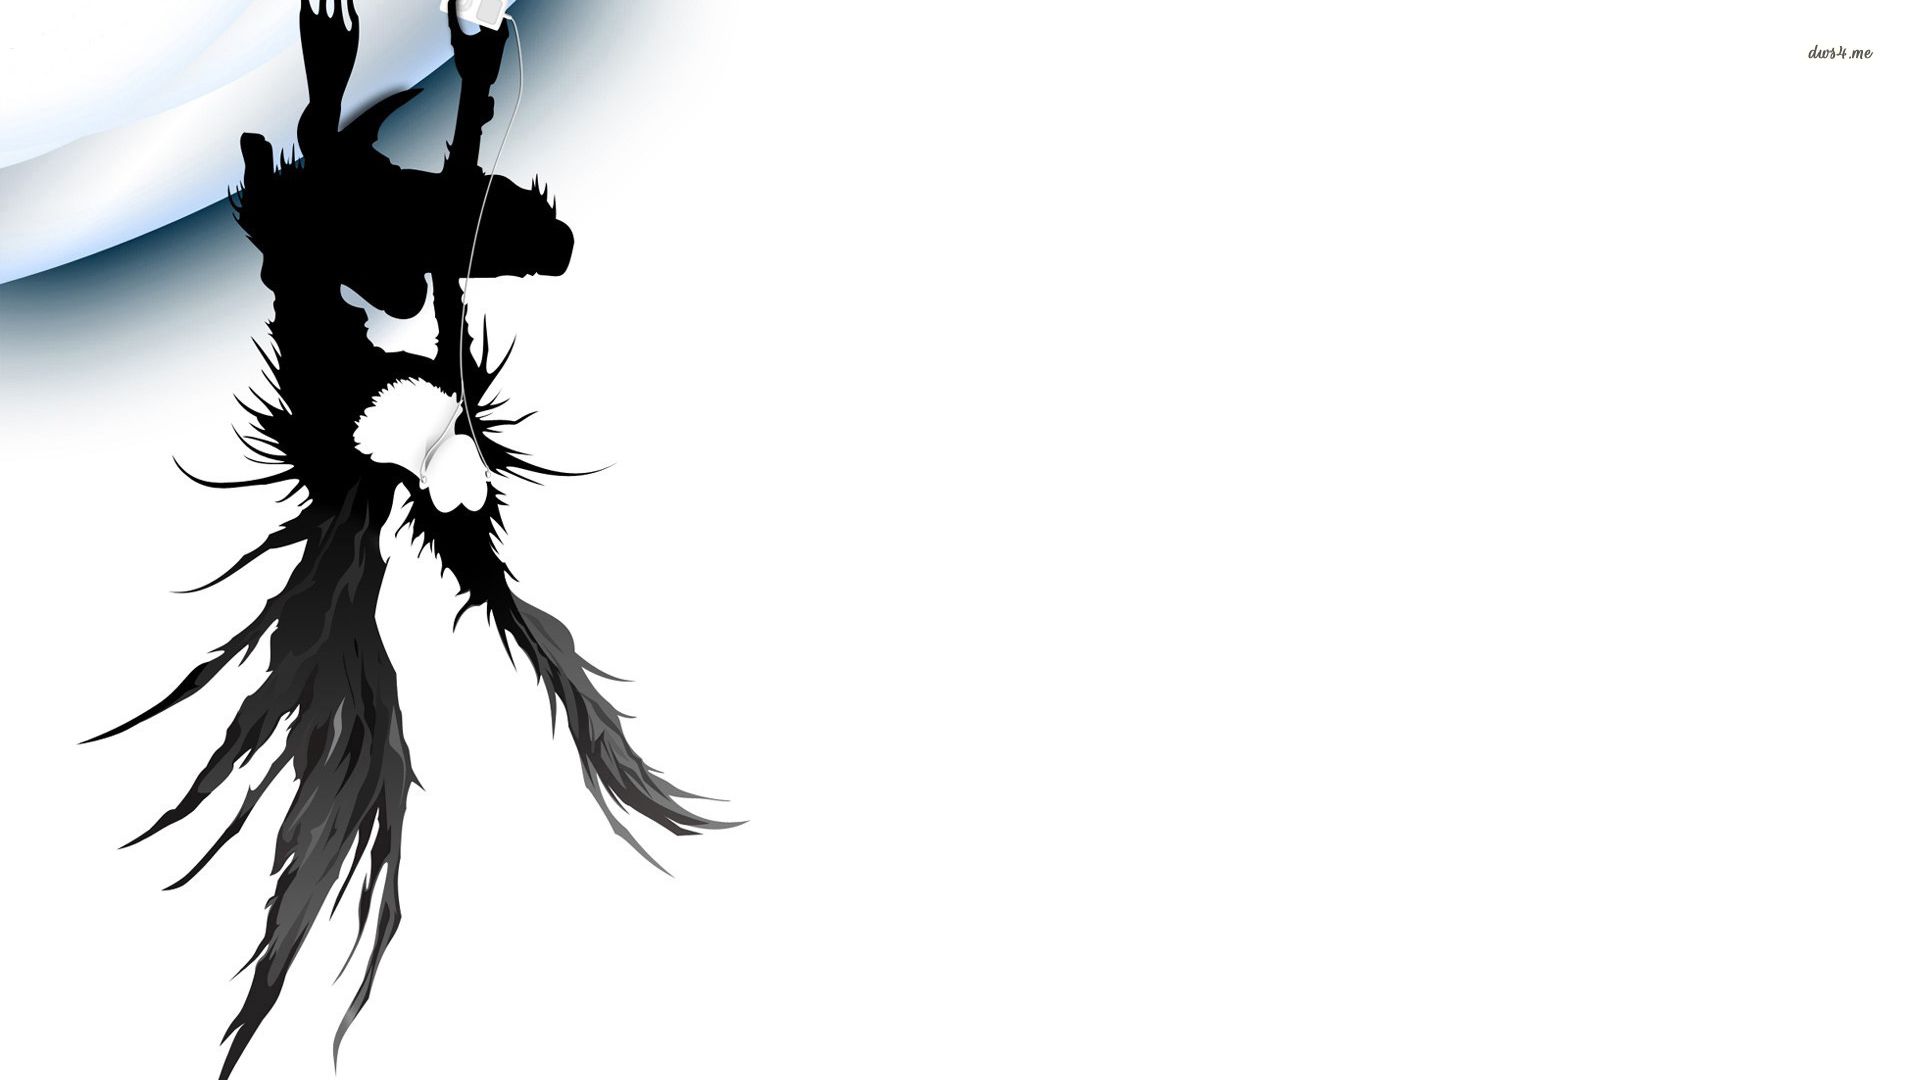 Ryuk - Death Note wallpaper - Anime wallpapers - #41046